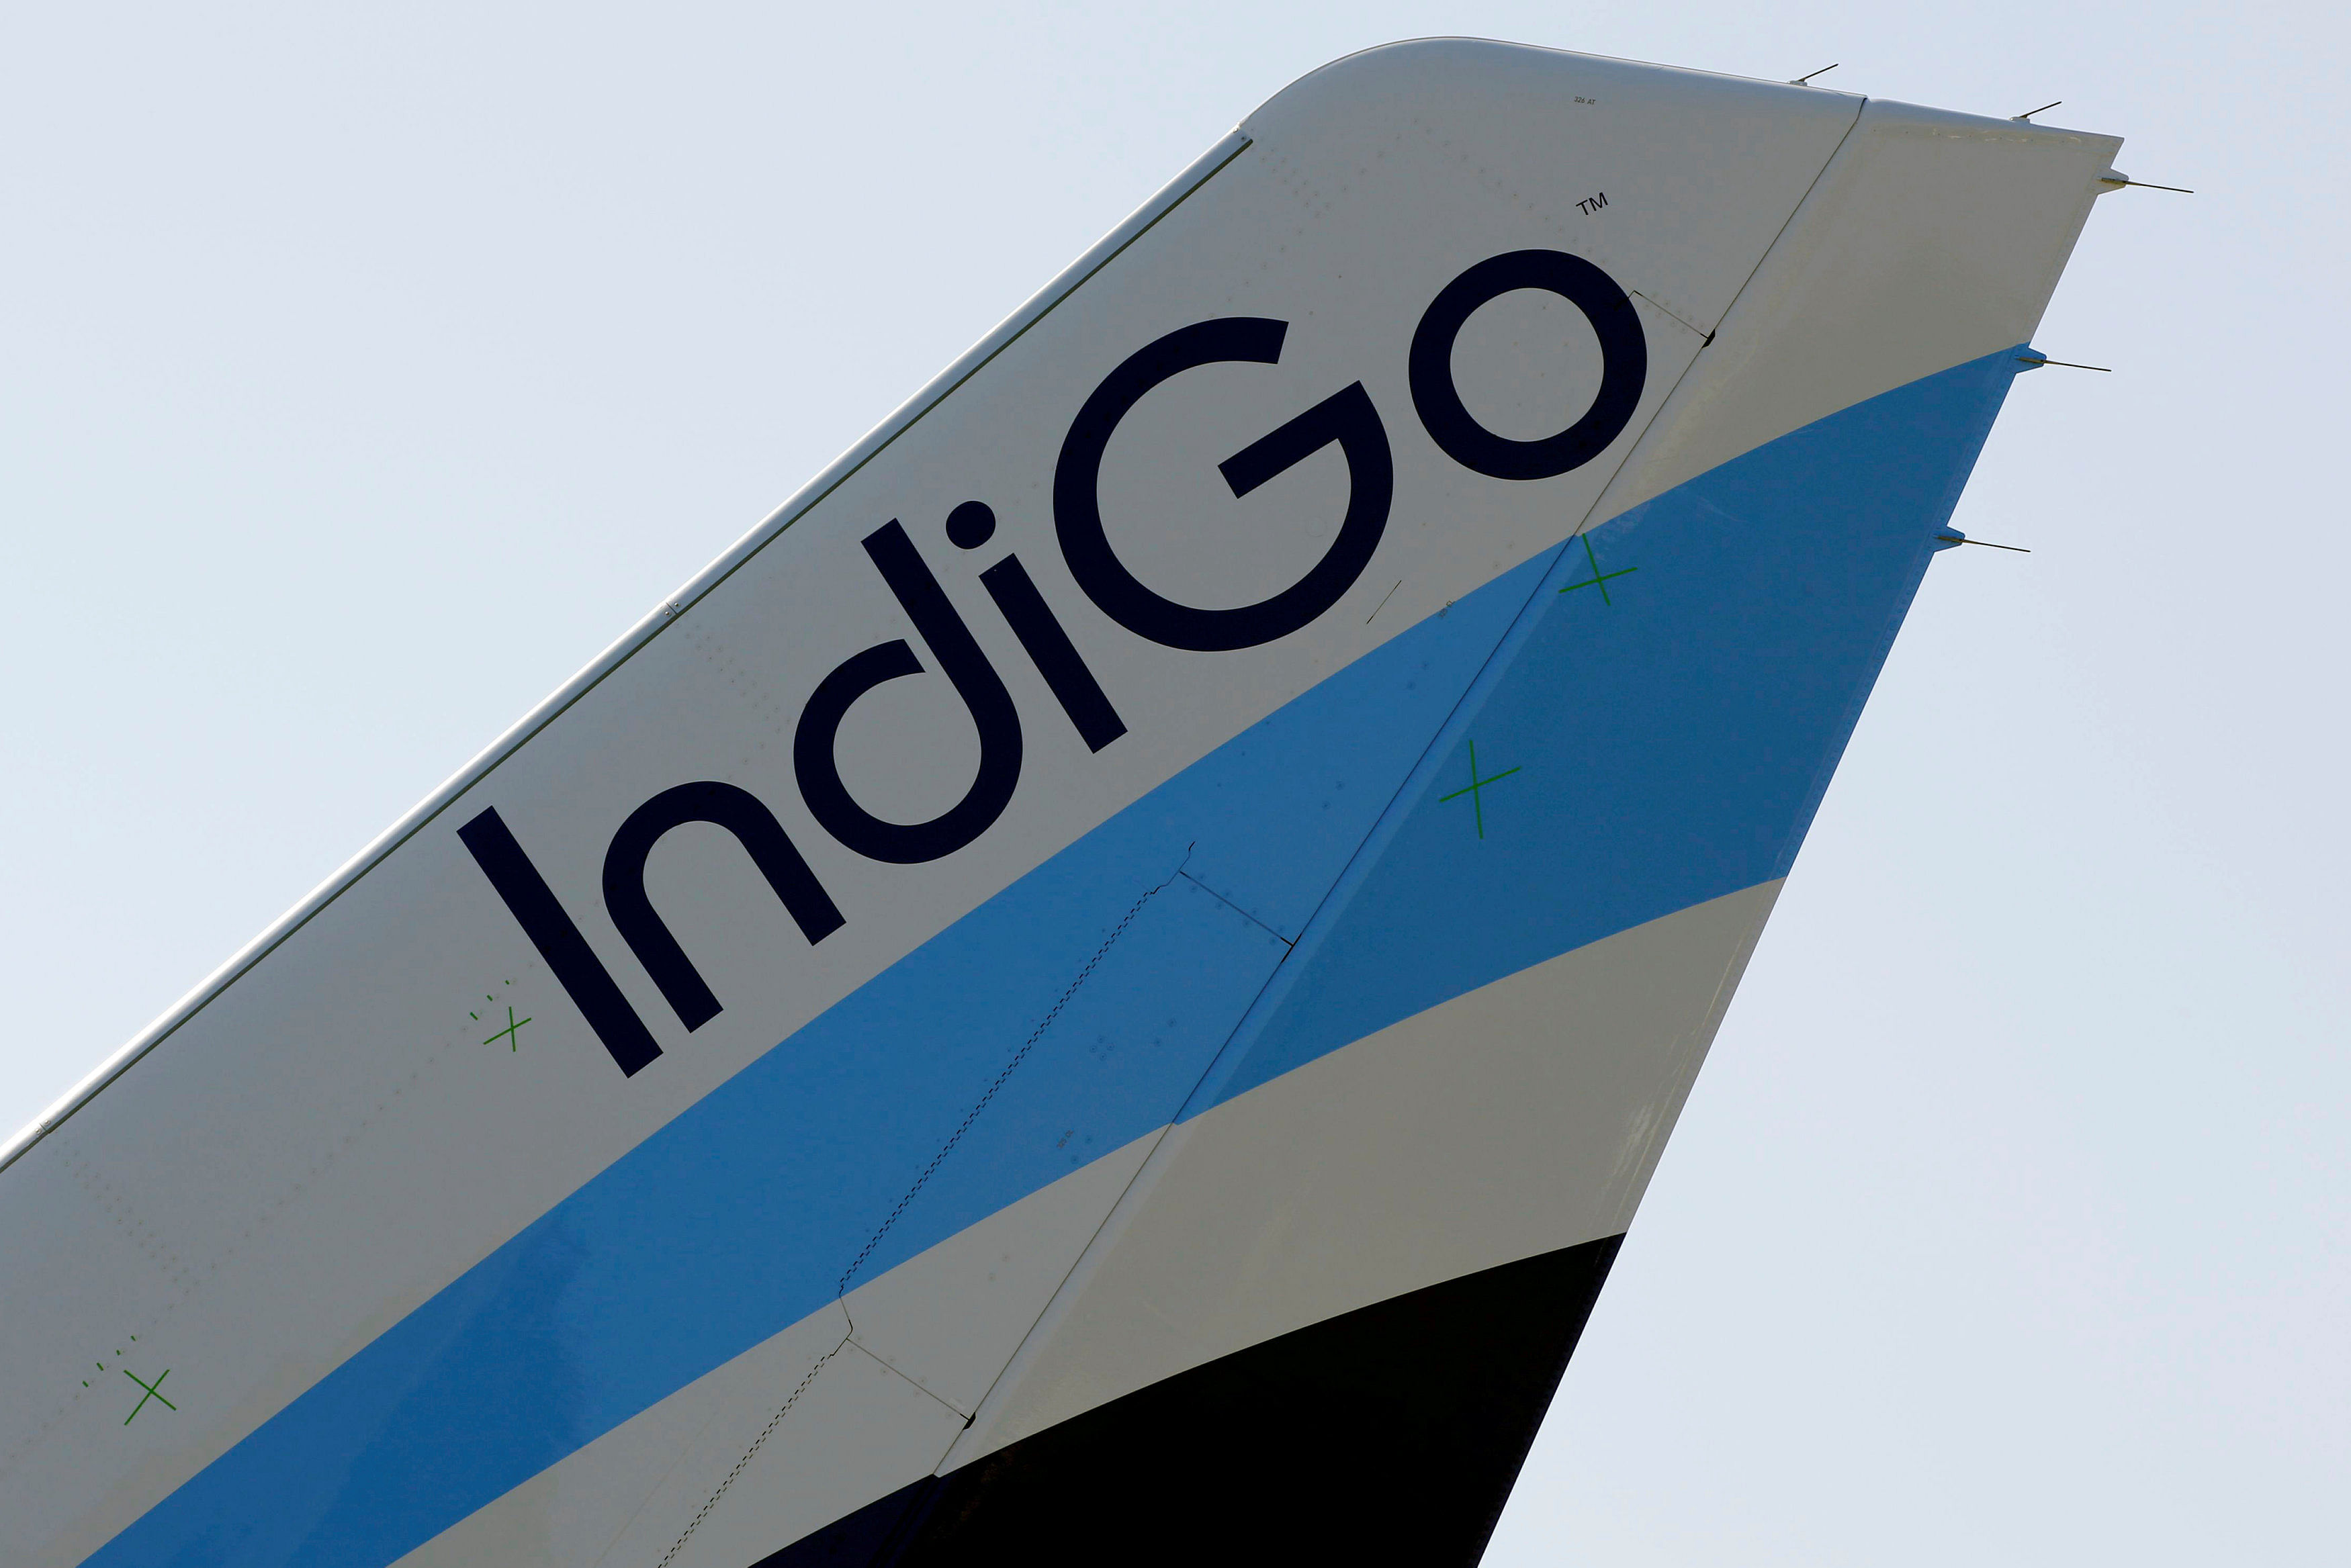 A logo of IndiGo Airlines is pictured on passenger aircraft. (Reuters Photo)